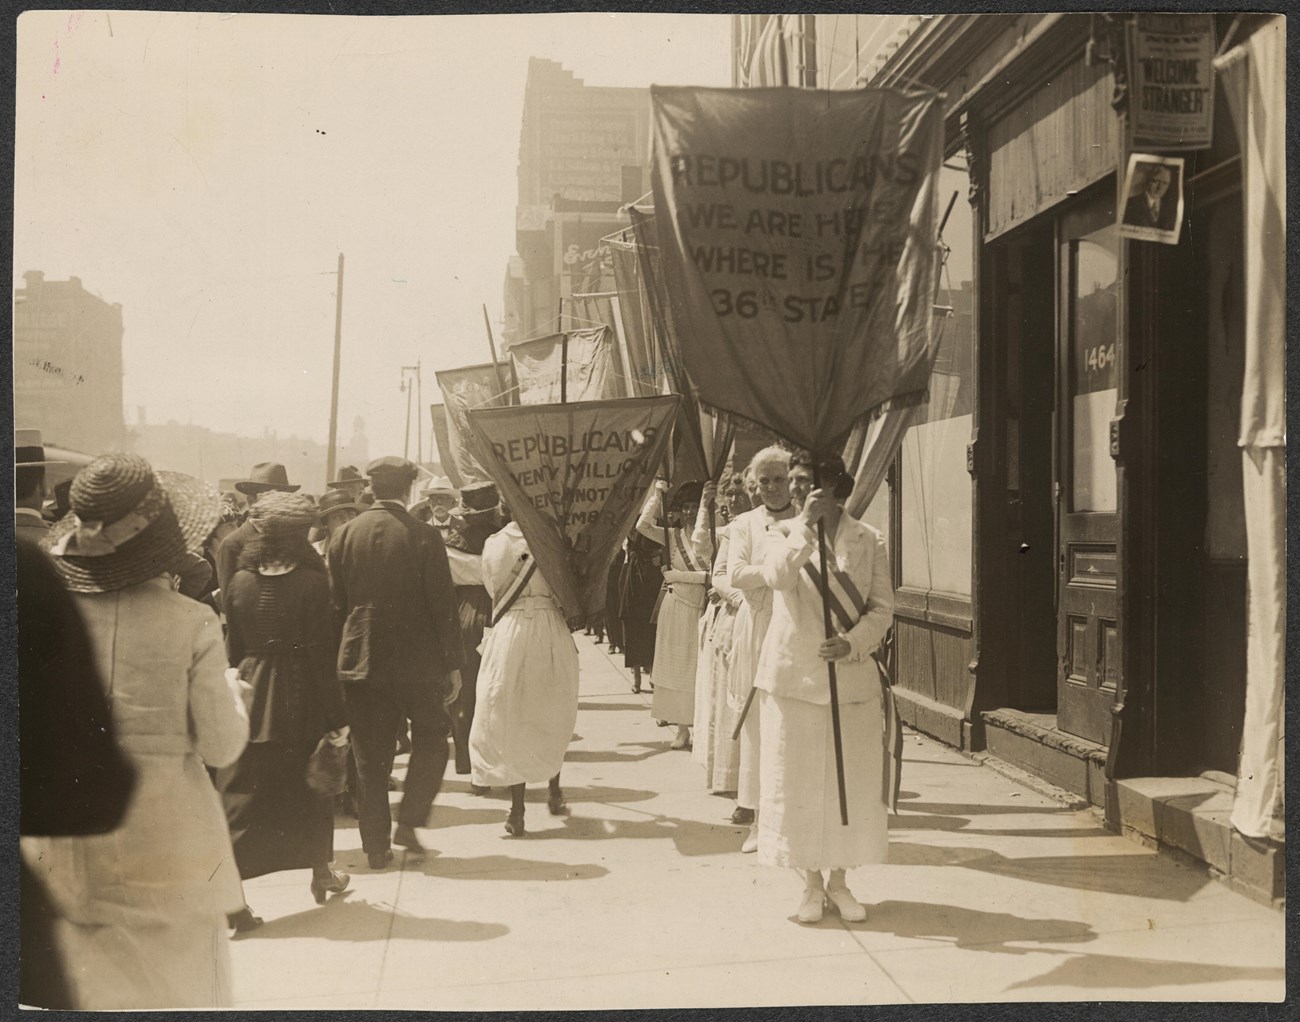 Photograph of line of suffragists (right) picketing with banners on city sidewalks, with passerby (left). Banner in foreground reads: "Republicans We Are Here Where is The 36th State?"